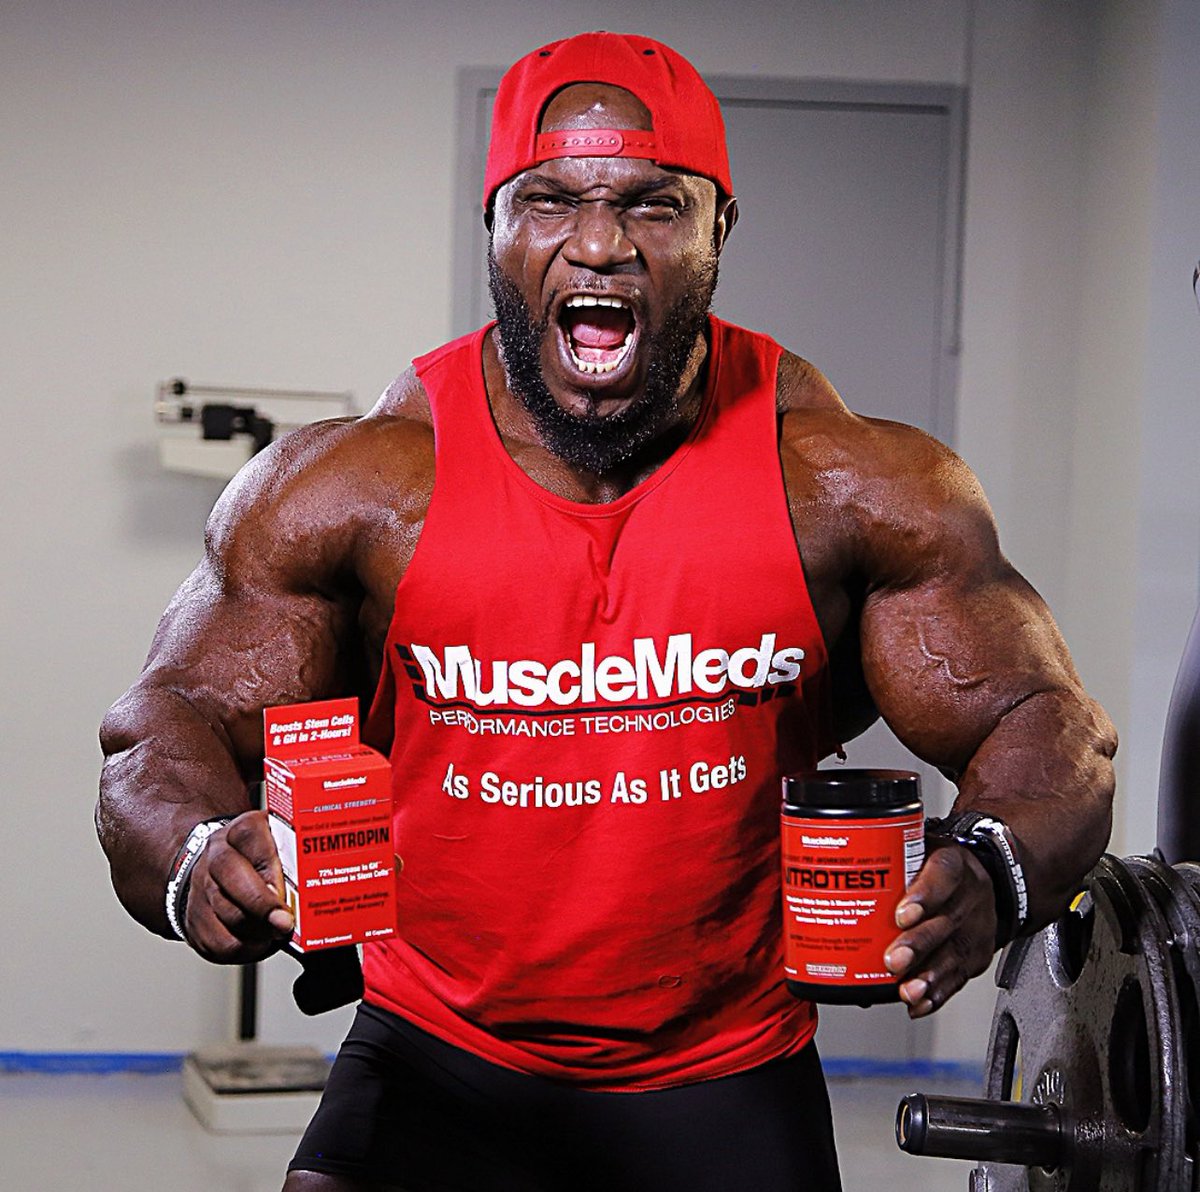 SUPERCHARGE YOUR WORKOUTS ⚡️ Get ready to dominate EVERY training session with these two hardcore product! Nitrotest and Stemtropin work synergistically to elevate your workout performance to the next level.📈 Learn More — MuscleMedsRX.com